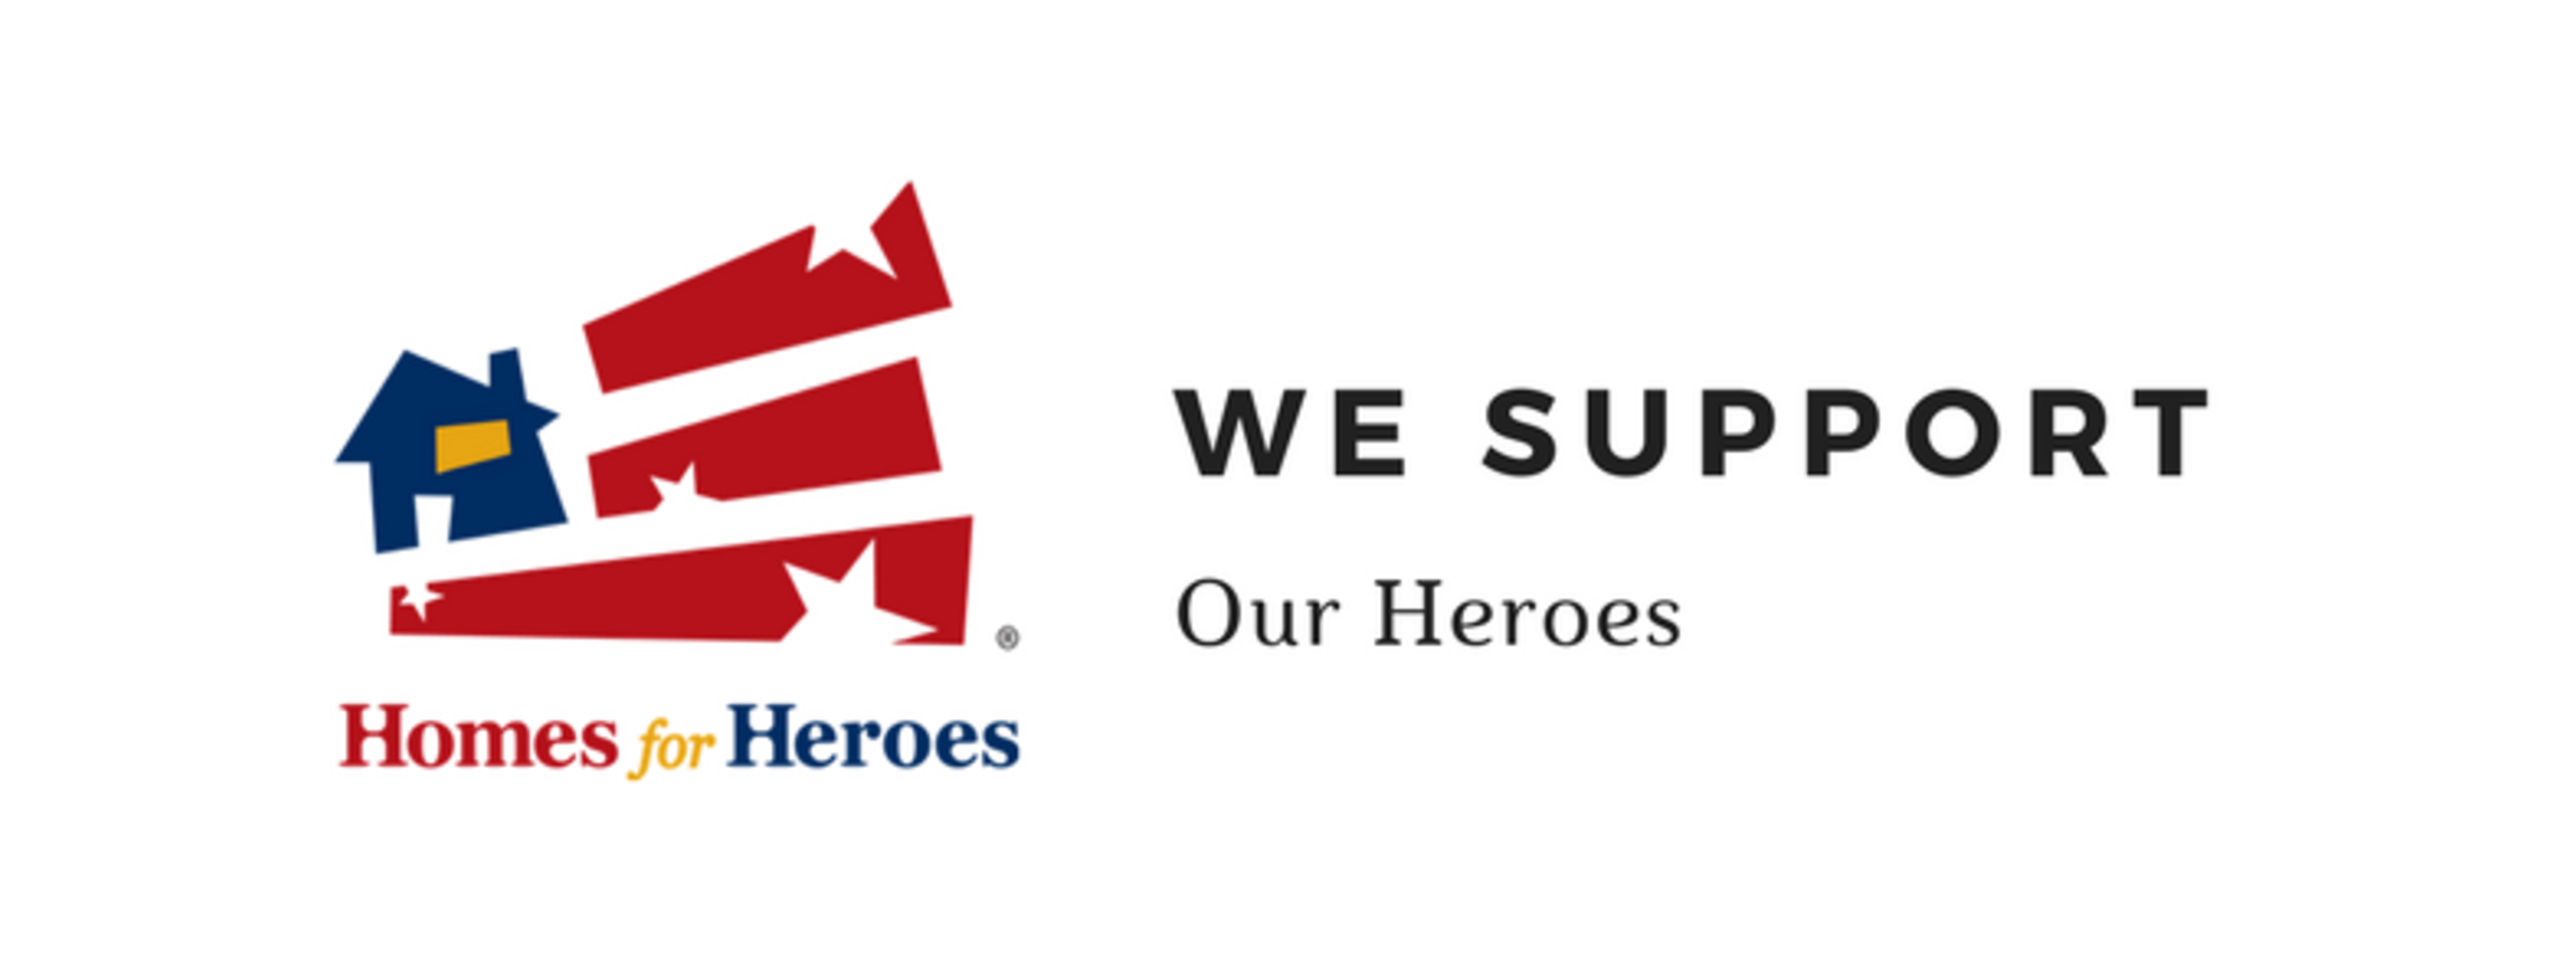 Our Heroes Rock!